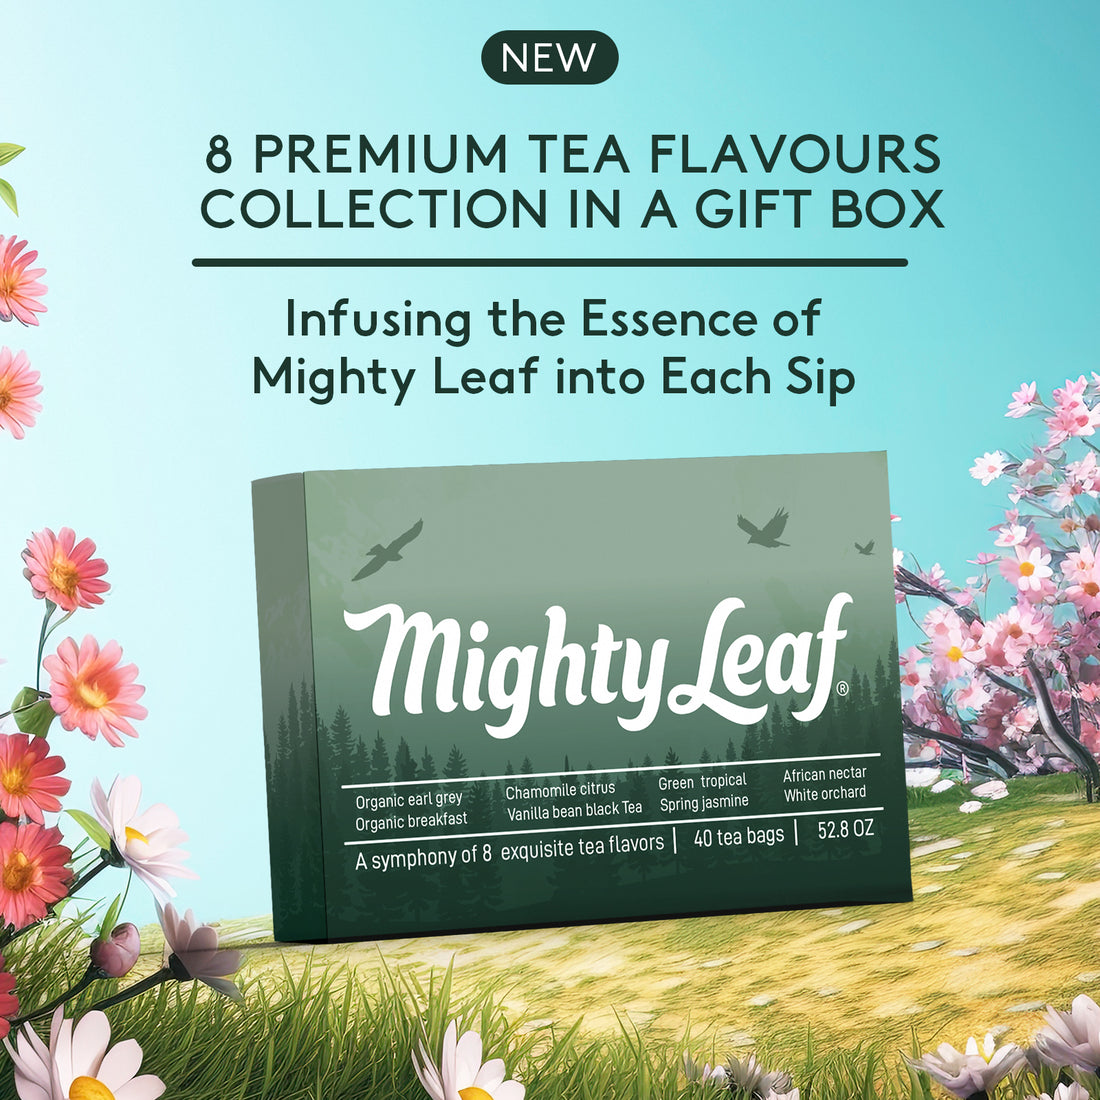 Tea Gift Box From Mighty-Leaf, Variety Pack 8 Flavors, 5 Pouches Each